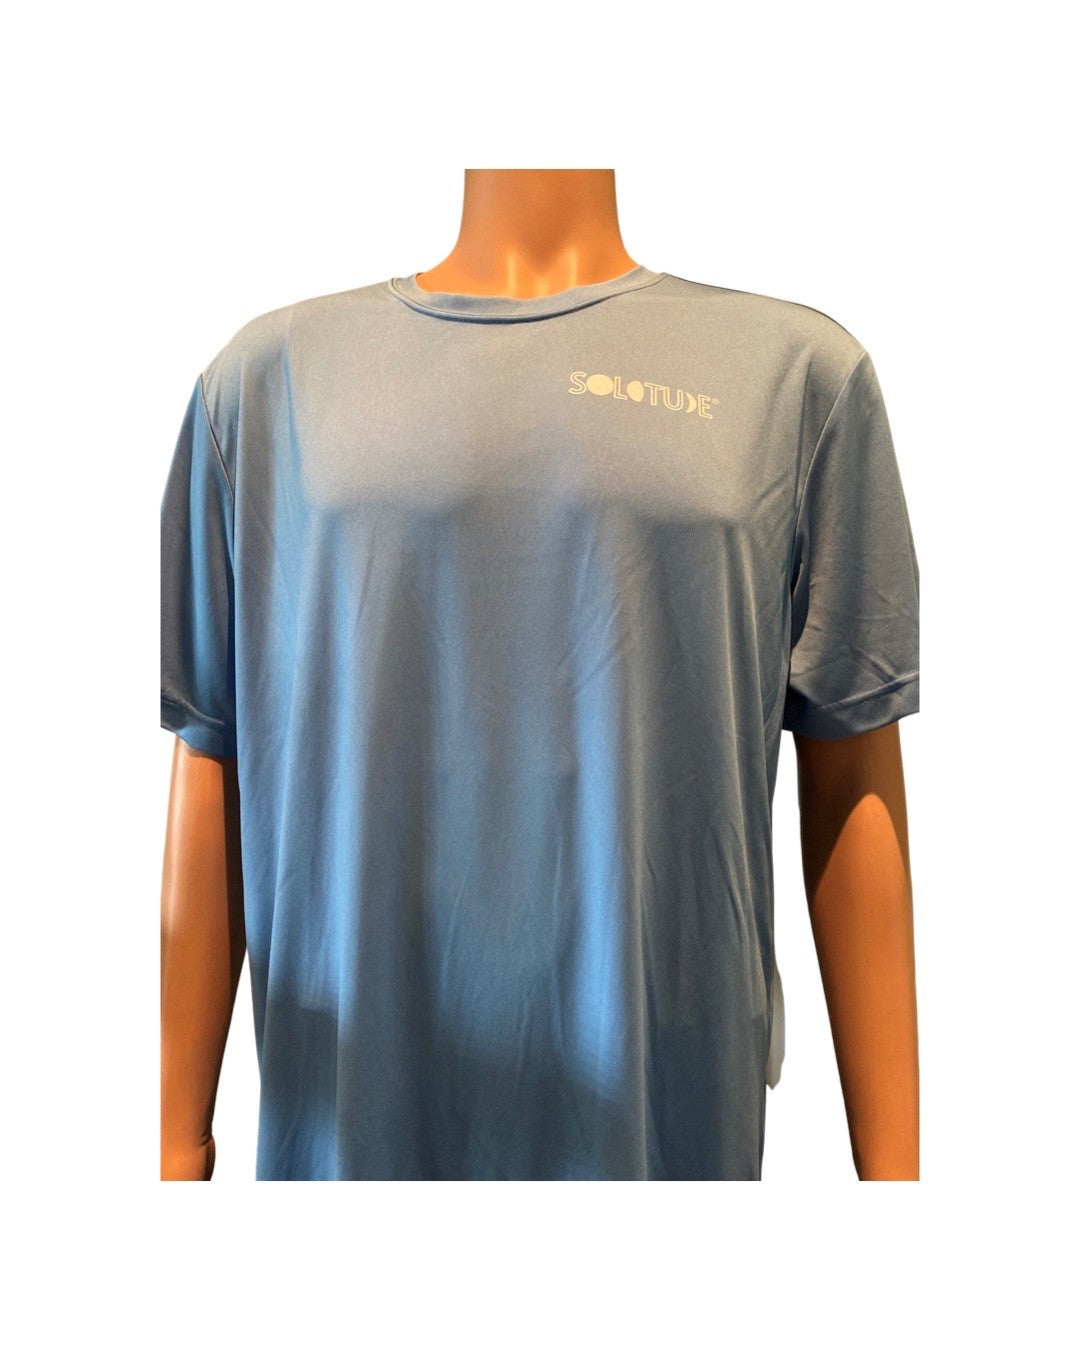 Performance Polyester Short Sleeved Shirt (Color Selections)